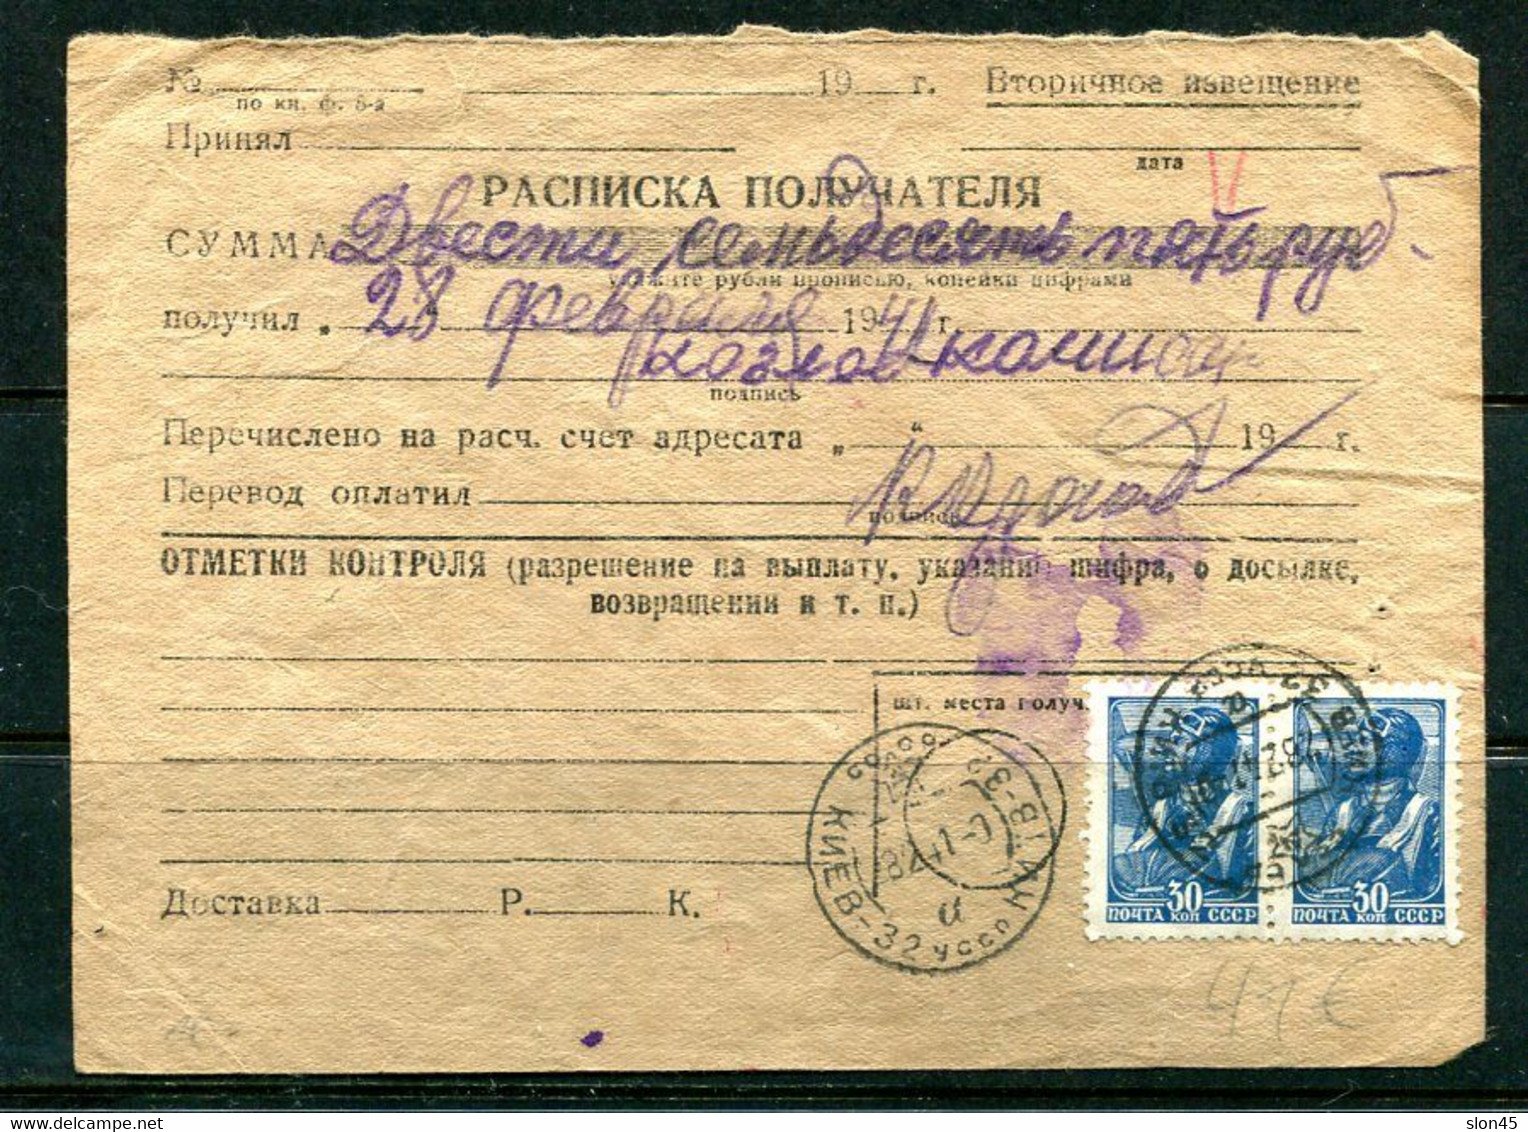 Russia 1941 WWII Postal Money Order To Kiev Ukraine Pair 14510 - Covers & Documents